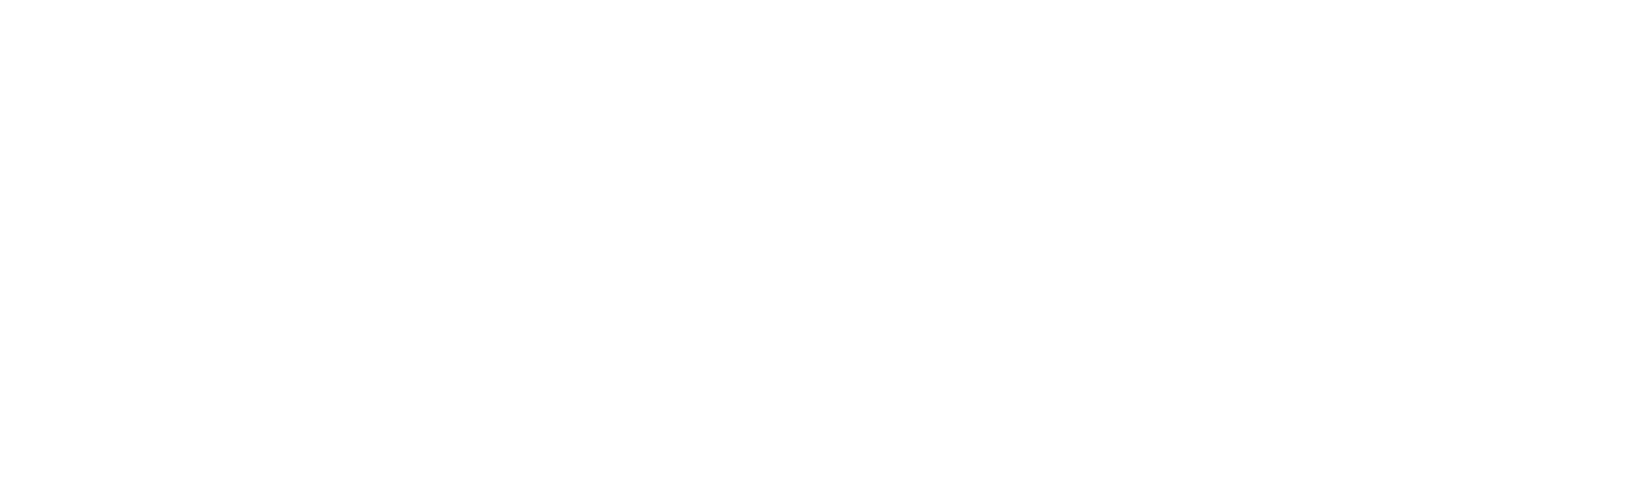 Sphero Support and Knowledge Base.